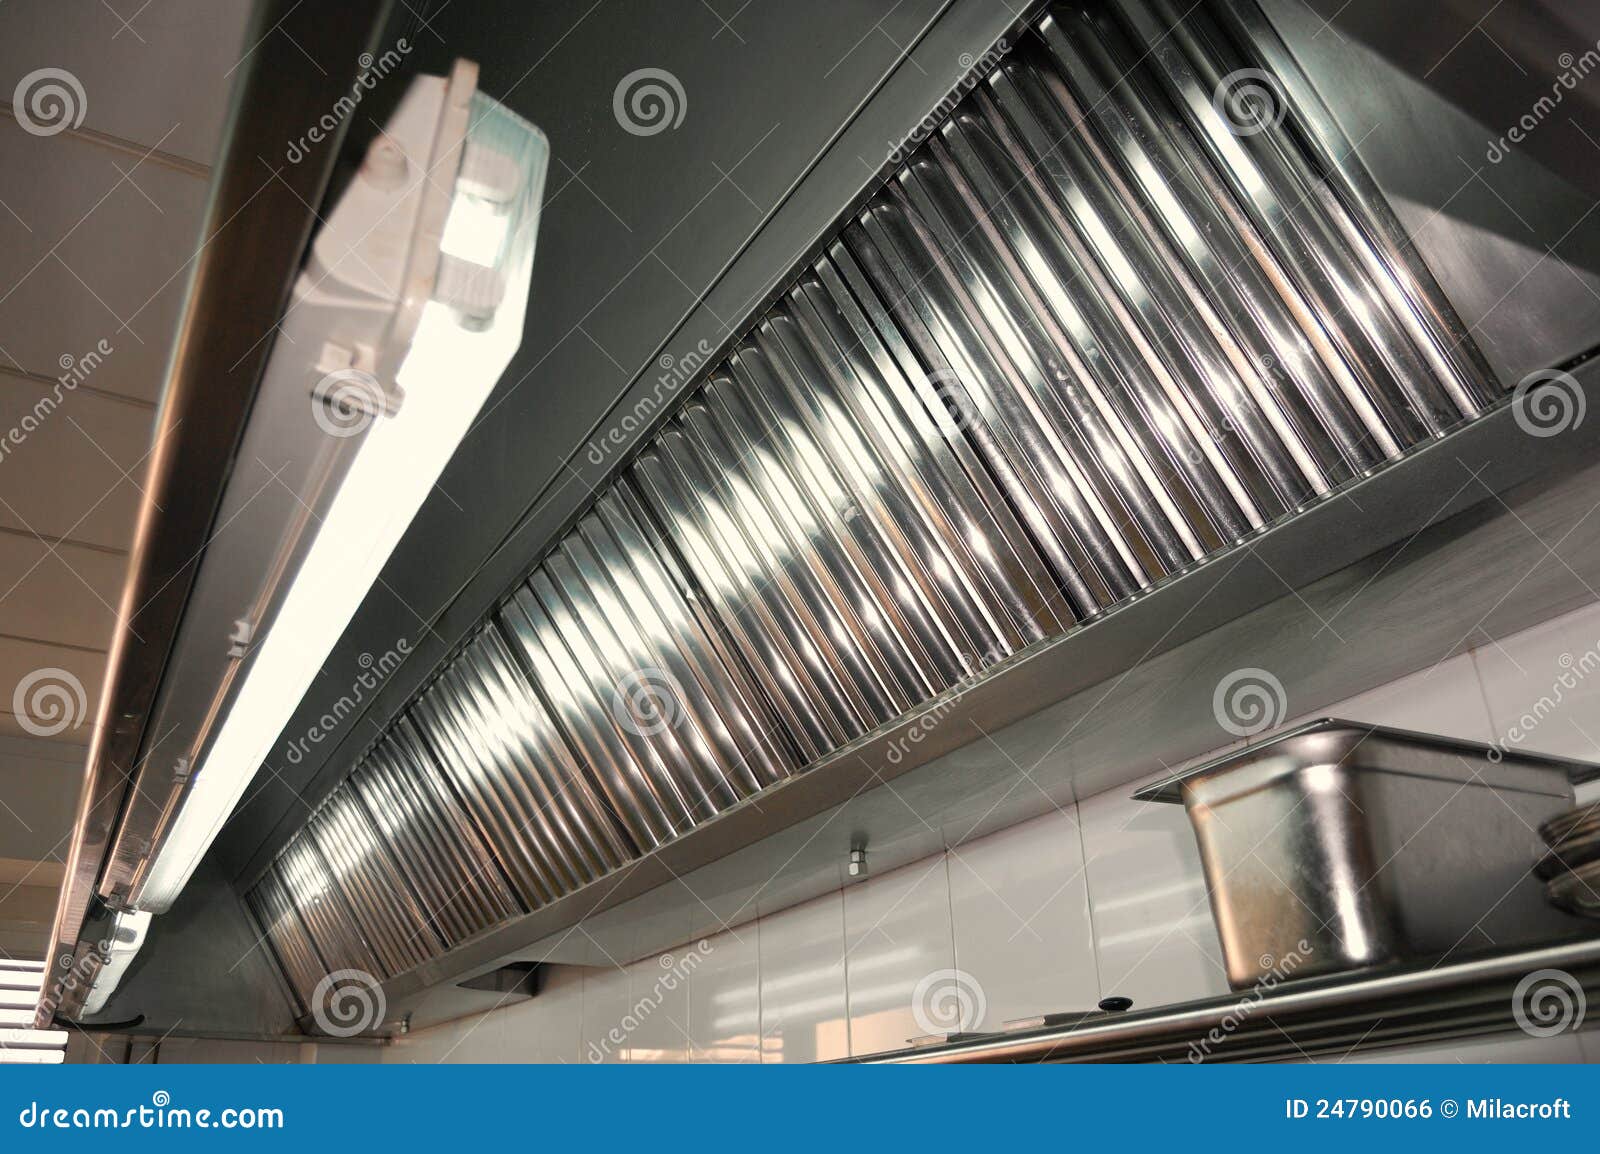 professional kitchen, exhaust systems